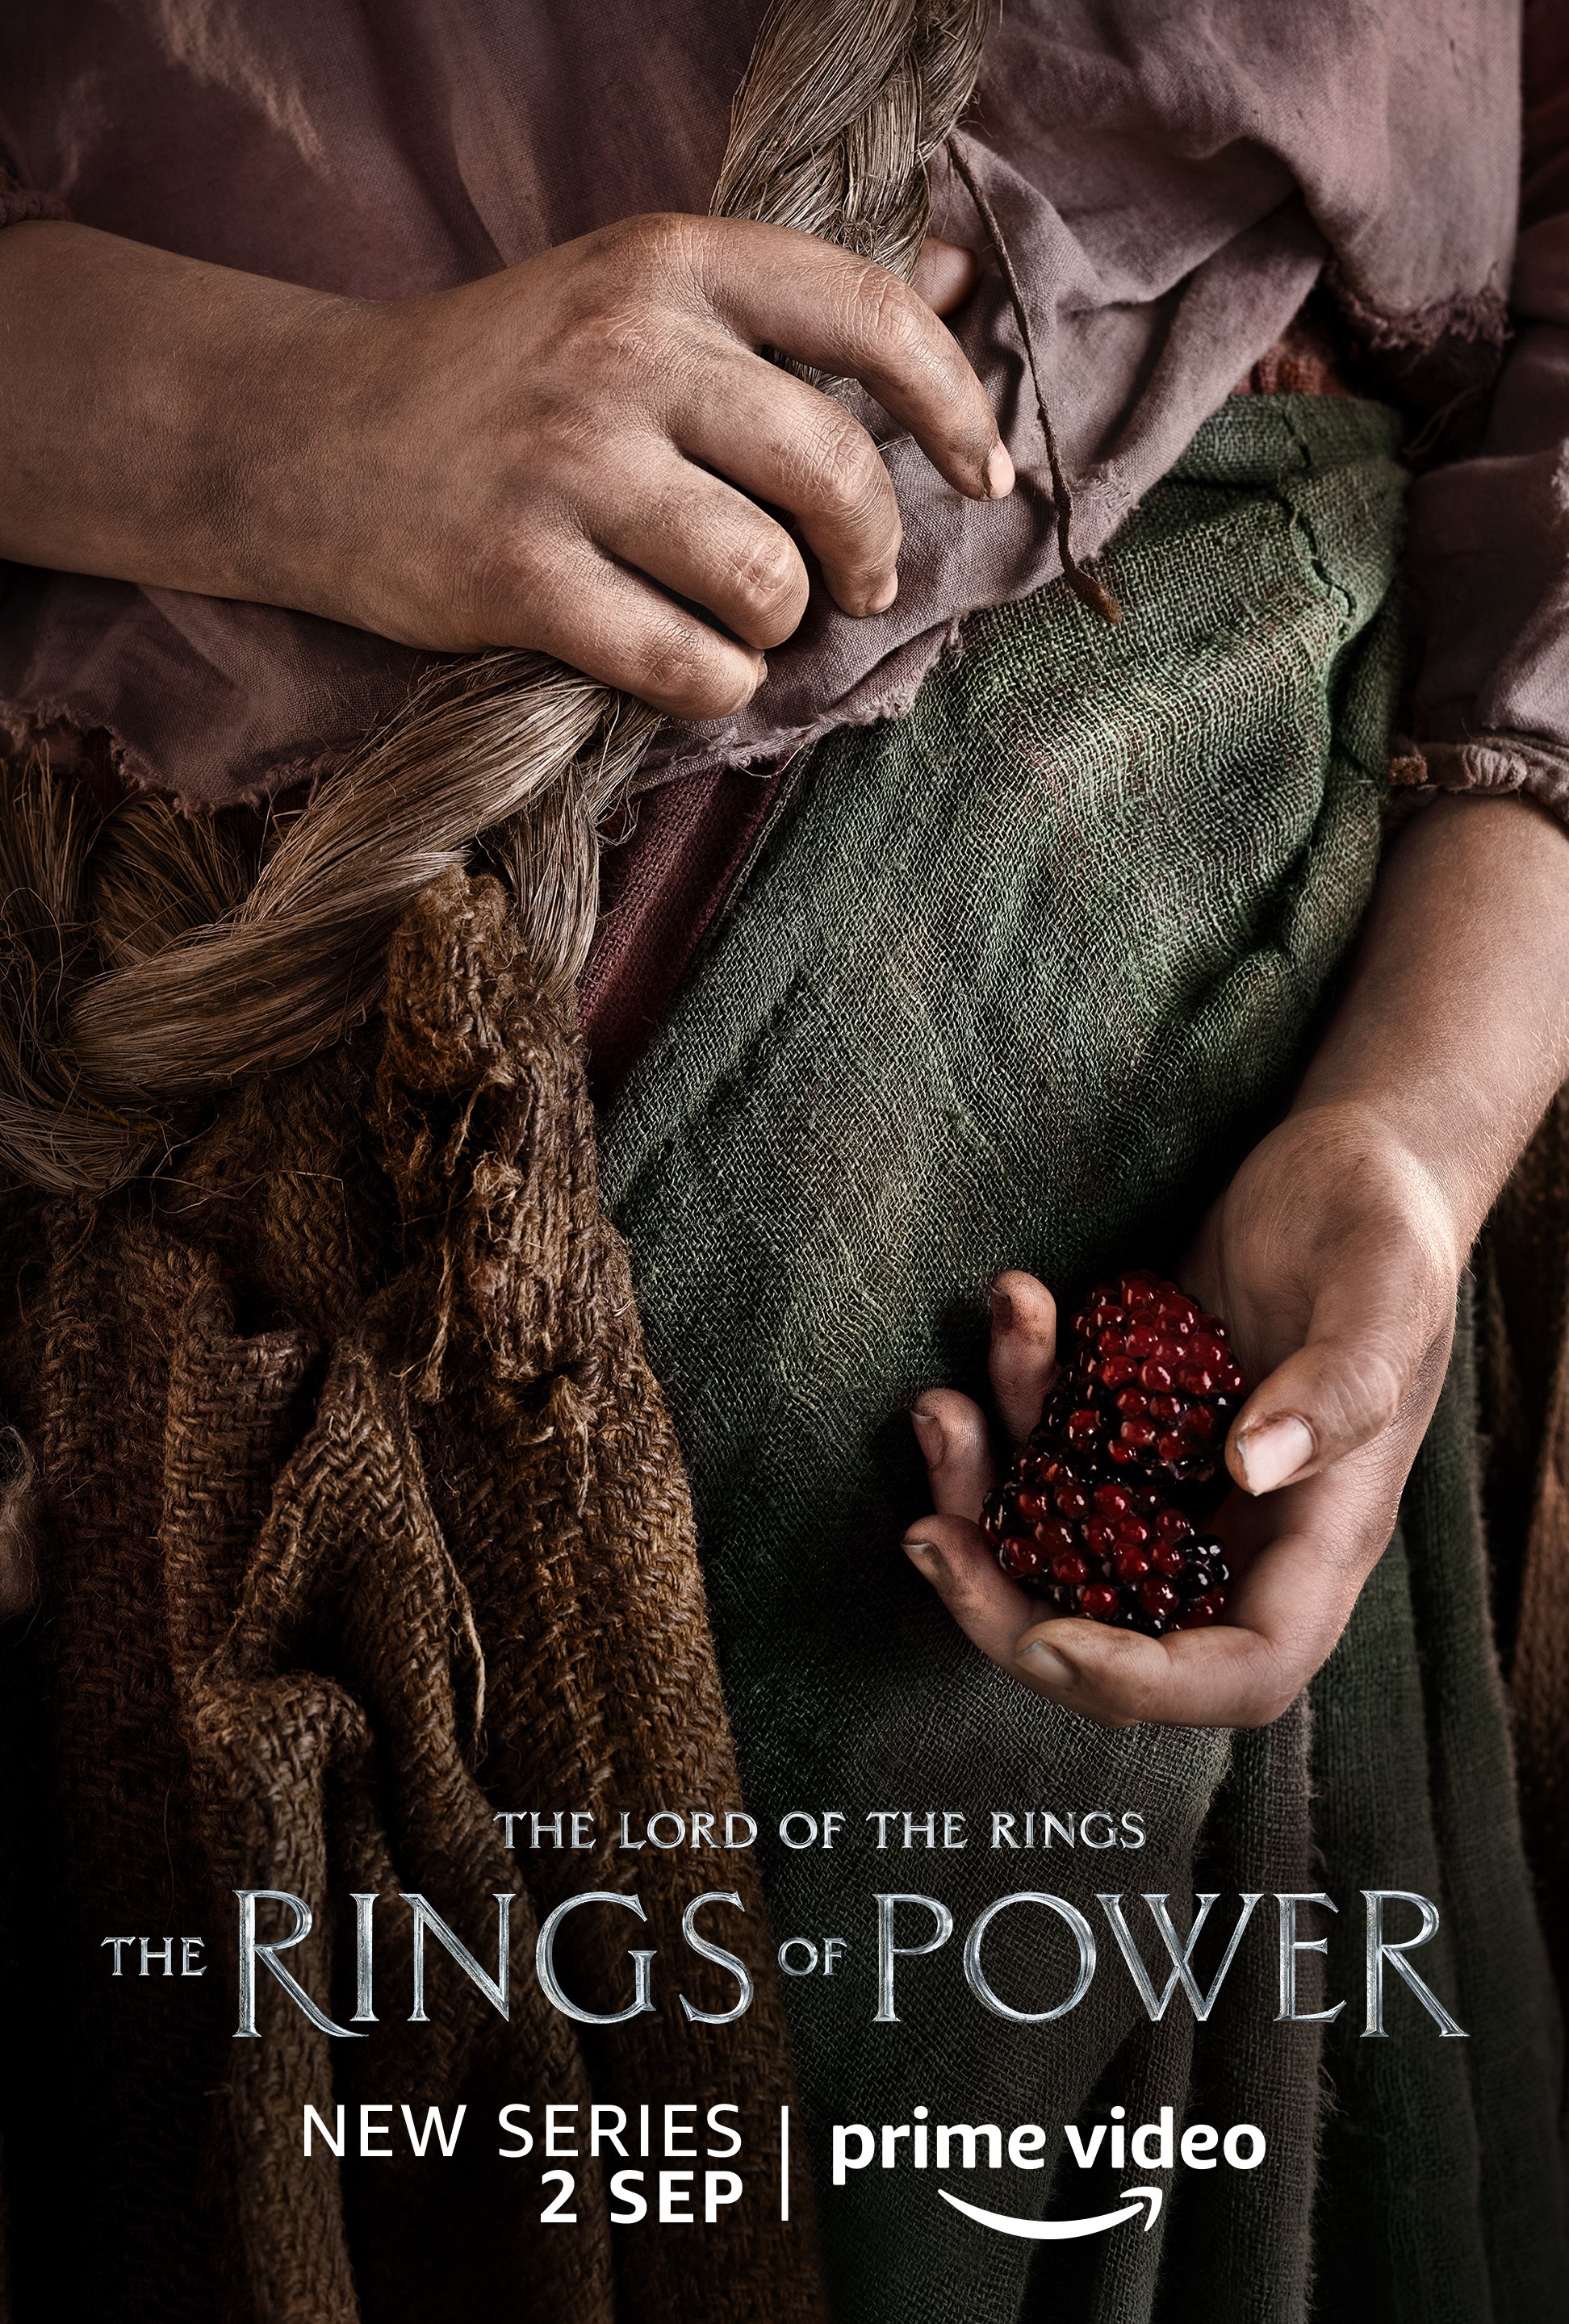 A person holding berries character poster for Lord of the Rings: The Rings of Power